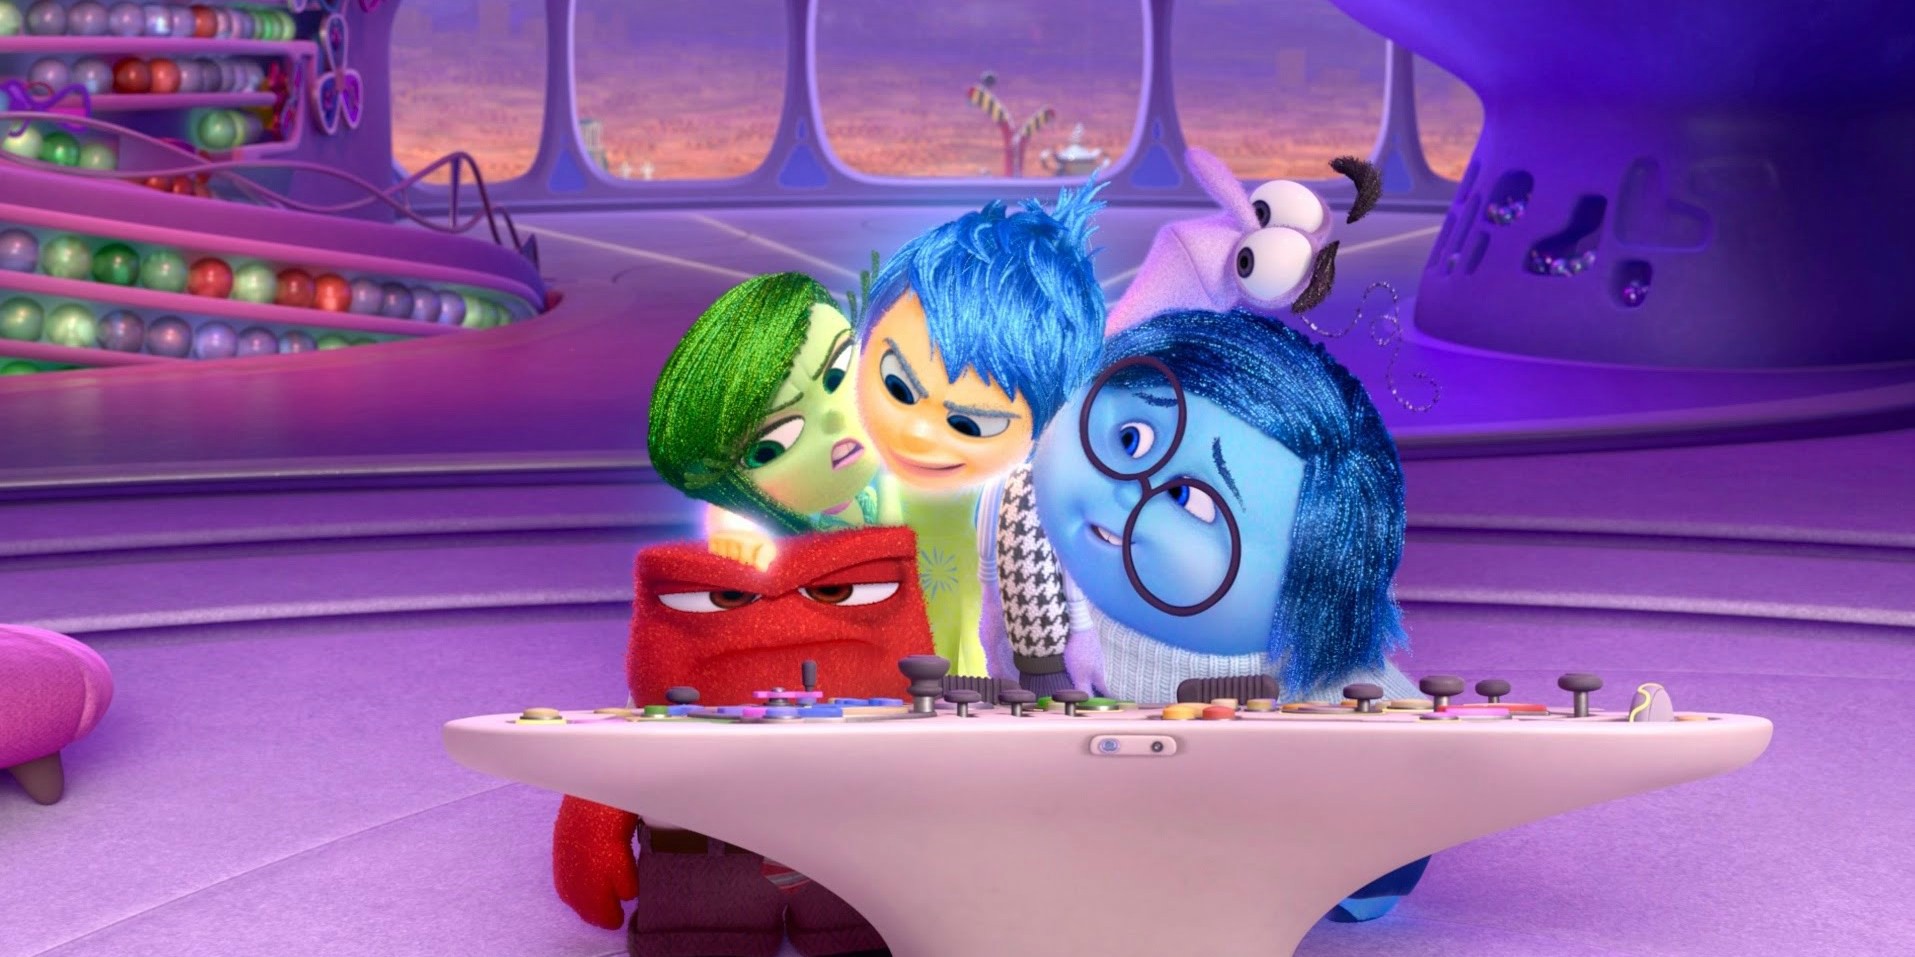 Inside Out - Riley is uprooted from her Midwest life when her father starts a new job in San Francisco. Riley is guided by her emotions  Joy, Fear, Anger, Disgust and Sadness. The emotions live in Headquarters, the control center inside Rileys mind, where they help advise her through everyday life. As Riley and her emotions struggle to adjust to a new life in San Francisco, turmoil ensues in Headquarters. Although Joy, Rileys main and most important emotion, tries to keep things positive, the emotions conflict on how best to navigate a new city, house and school. Release date: June 19th